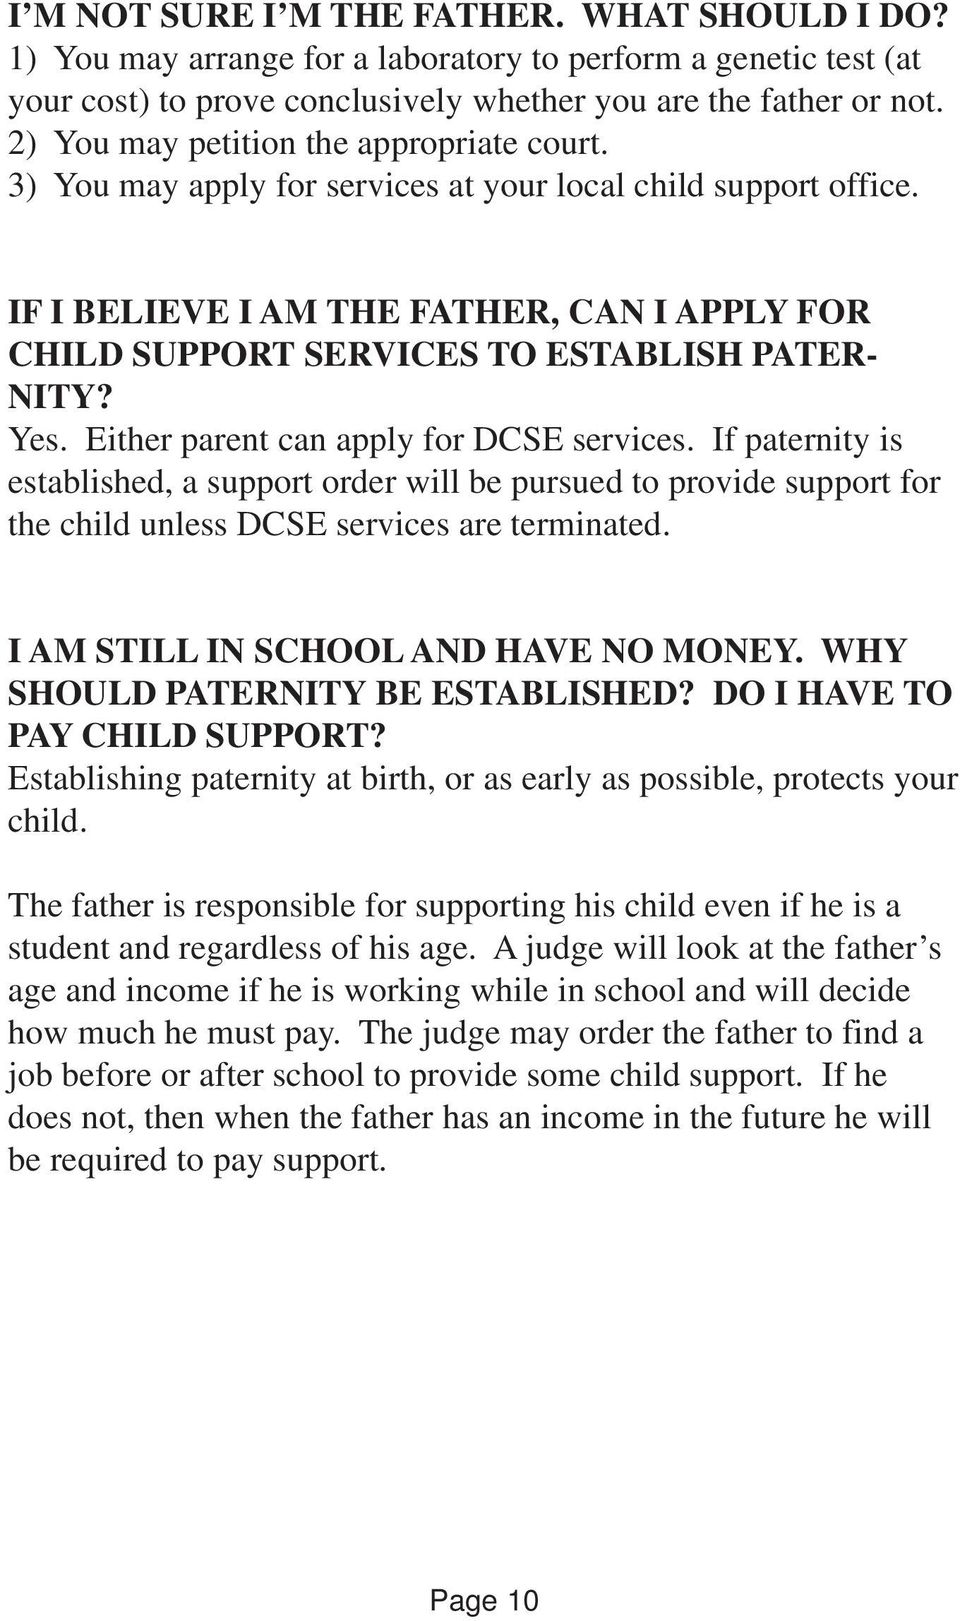 IF I BELIEVE I AM THE FATHER, CAN I APPLY FOR CHILD SUPPORT SERVICES TO ESTABLISH PATER- NITY? Yes. Either parent can apply for DCSE services.